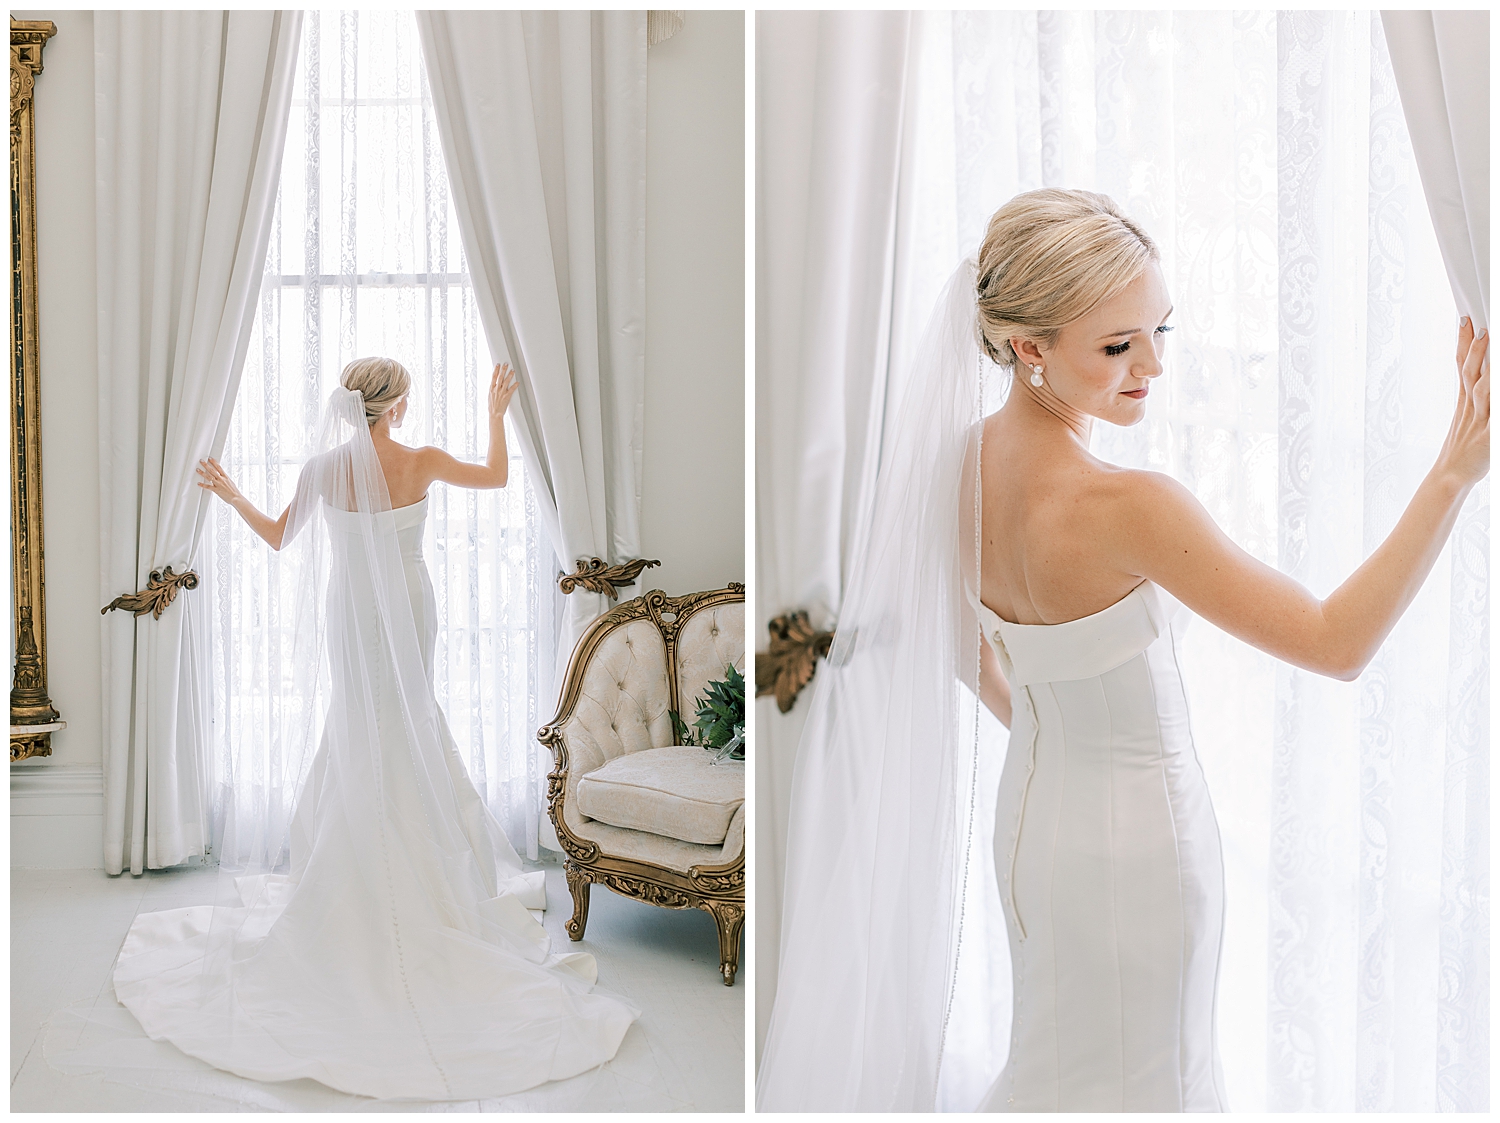 A bride looks over her shoulder in a white room.